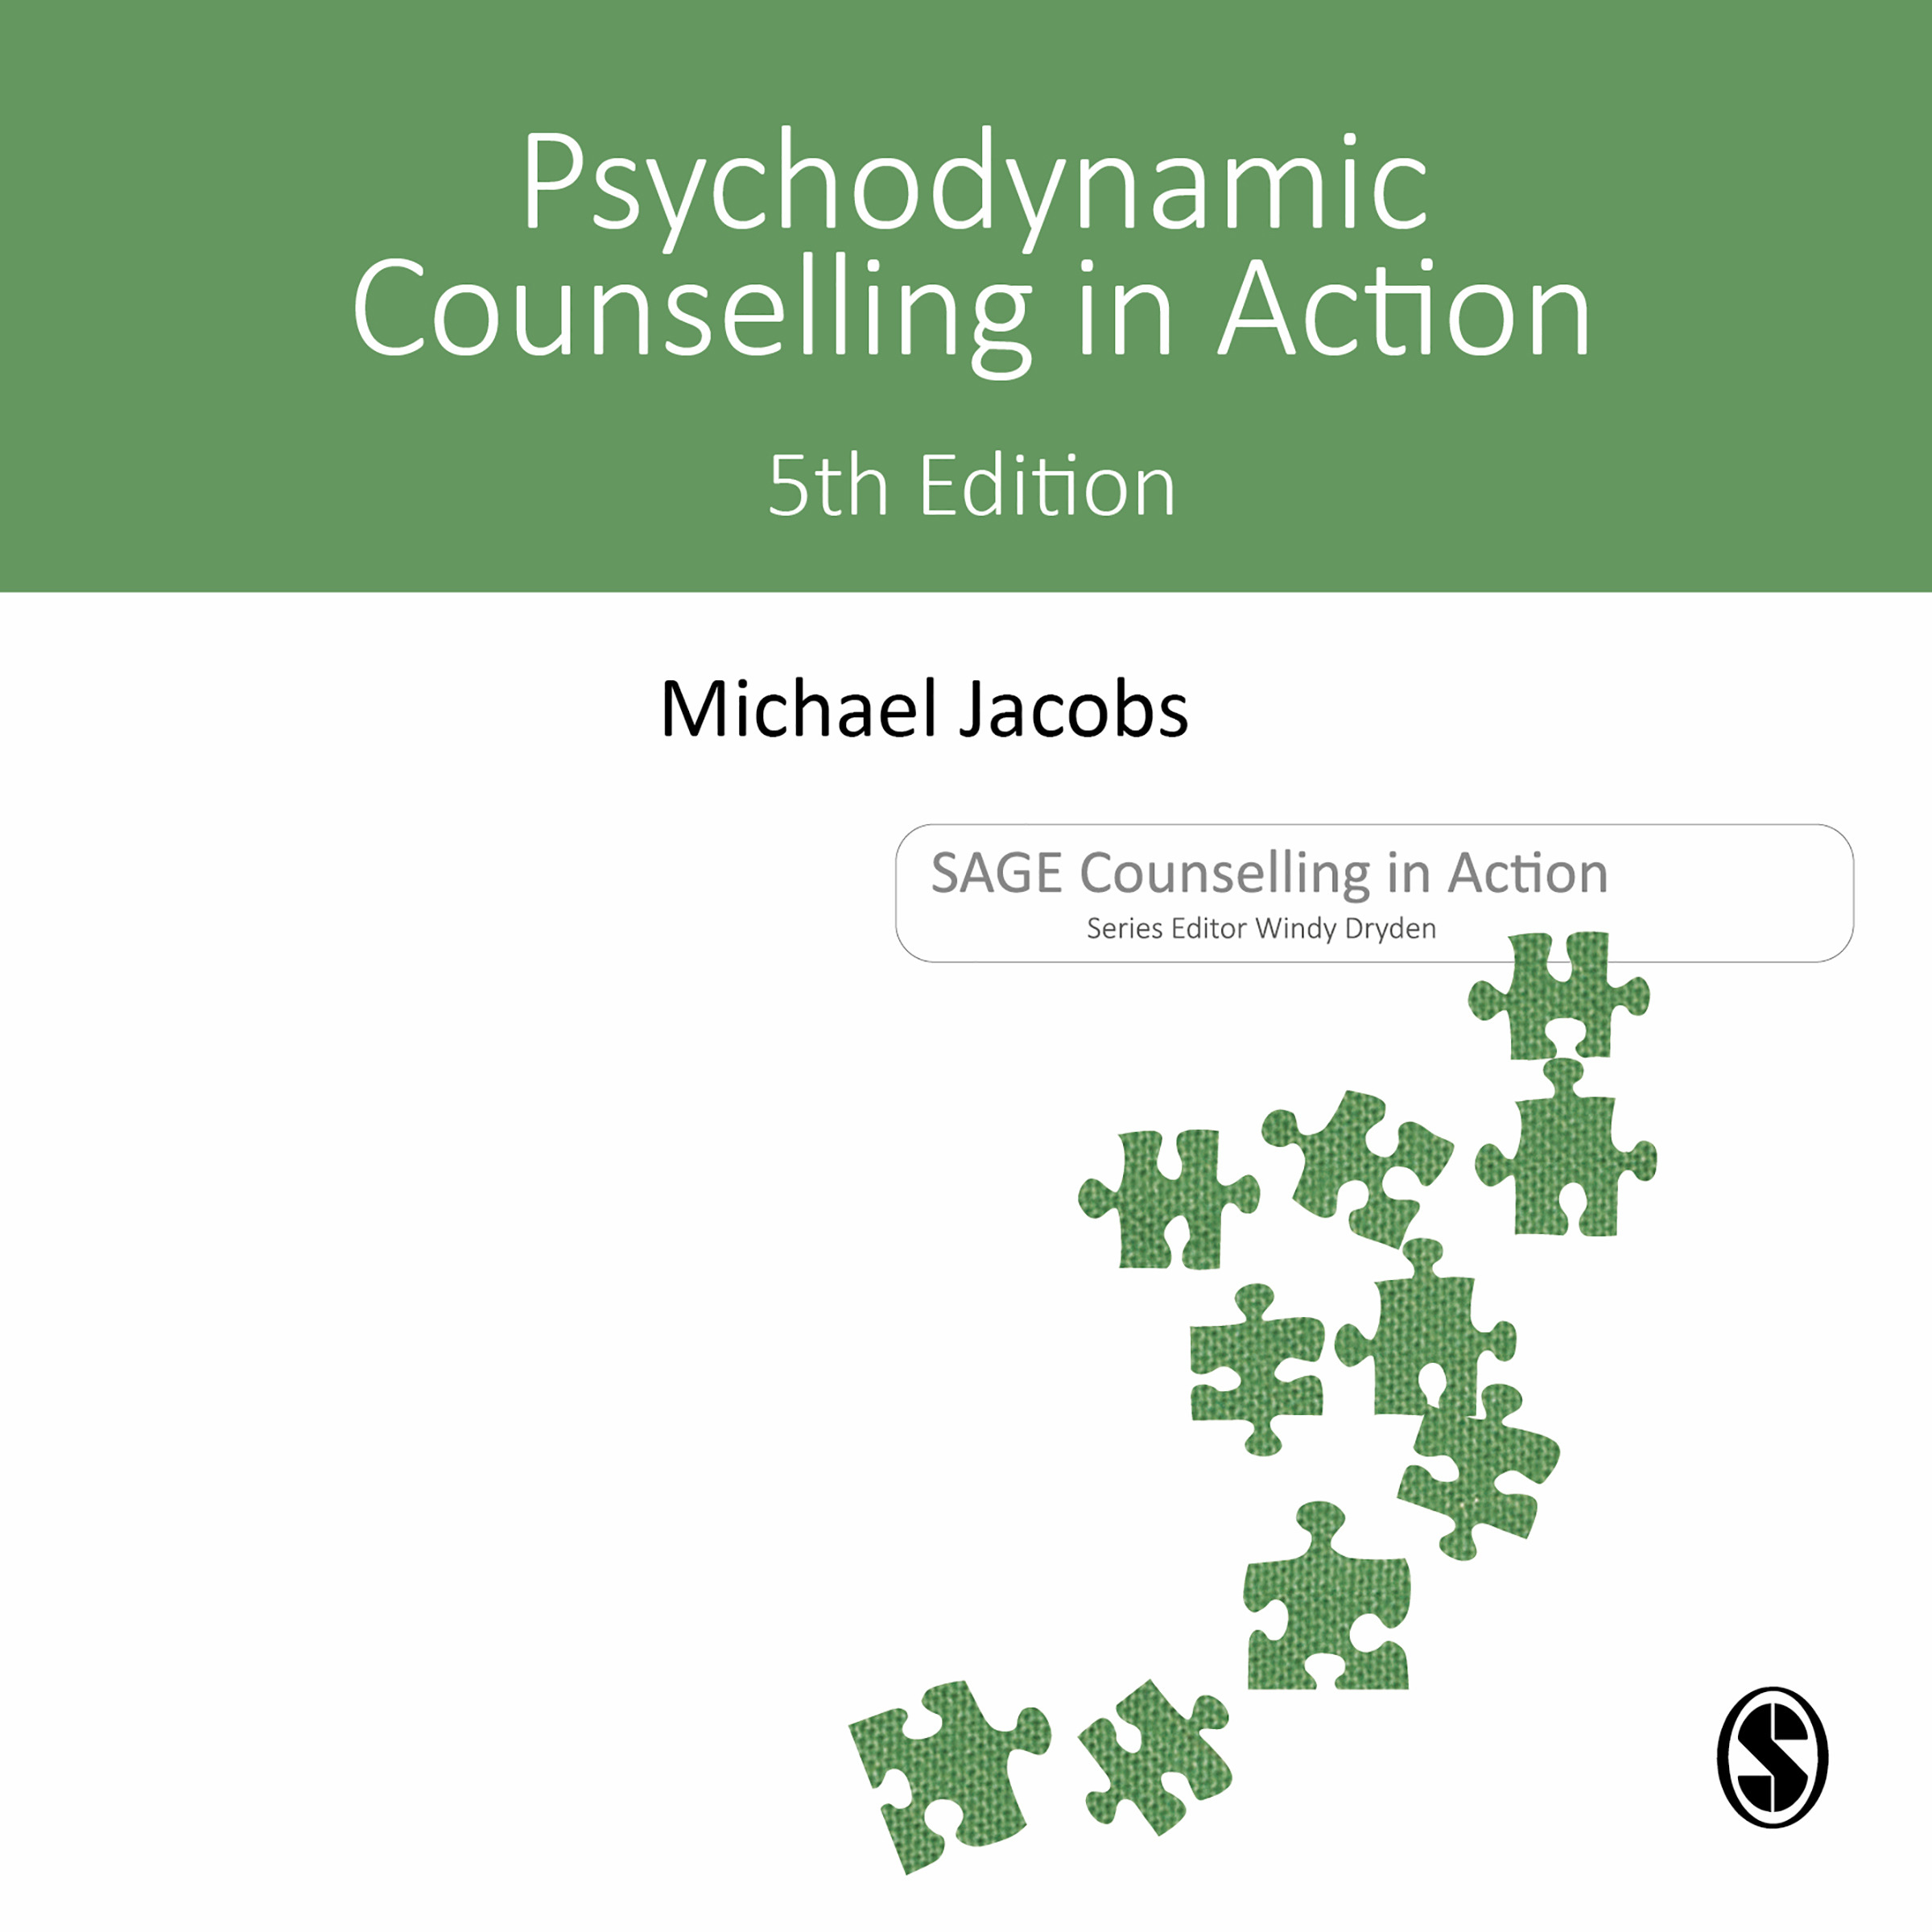 Psychodynamic Counselling in Action image